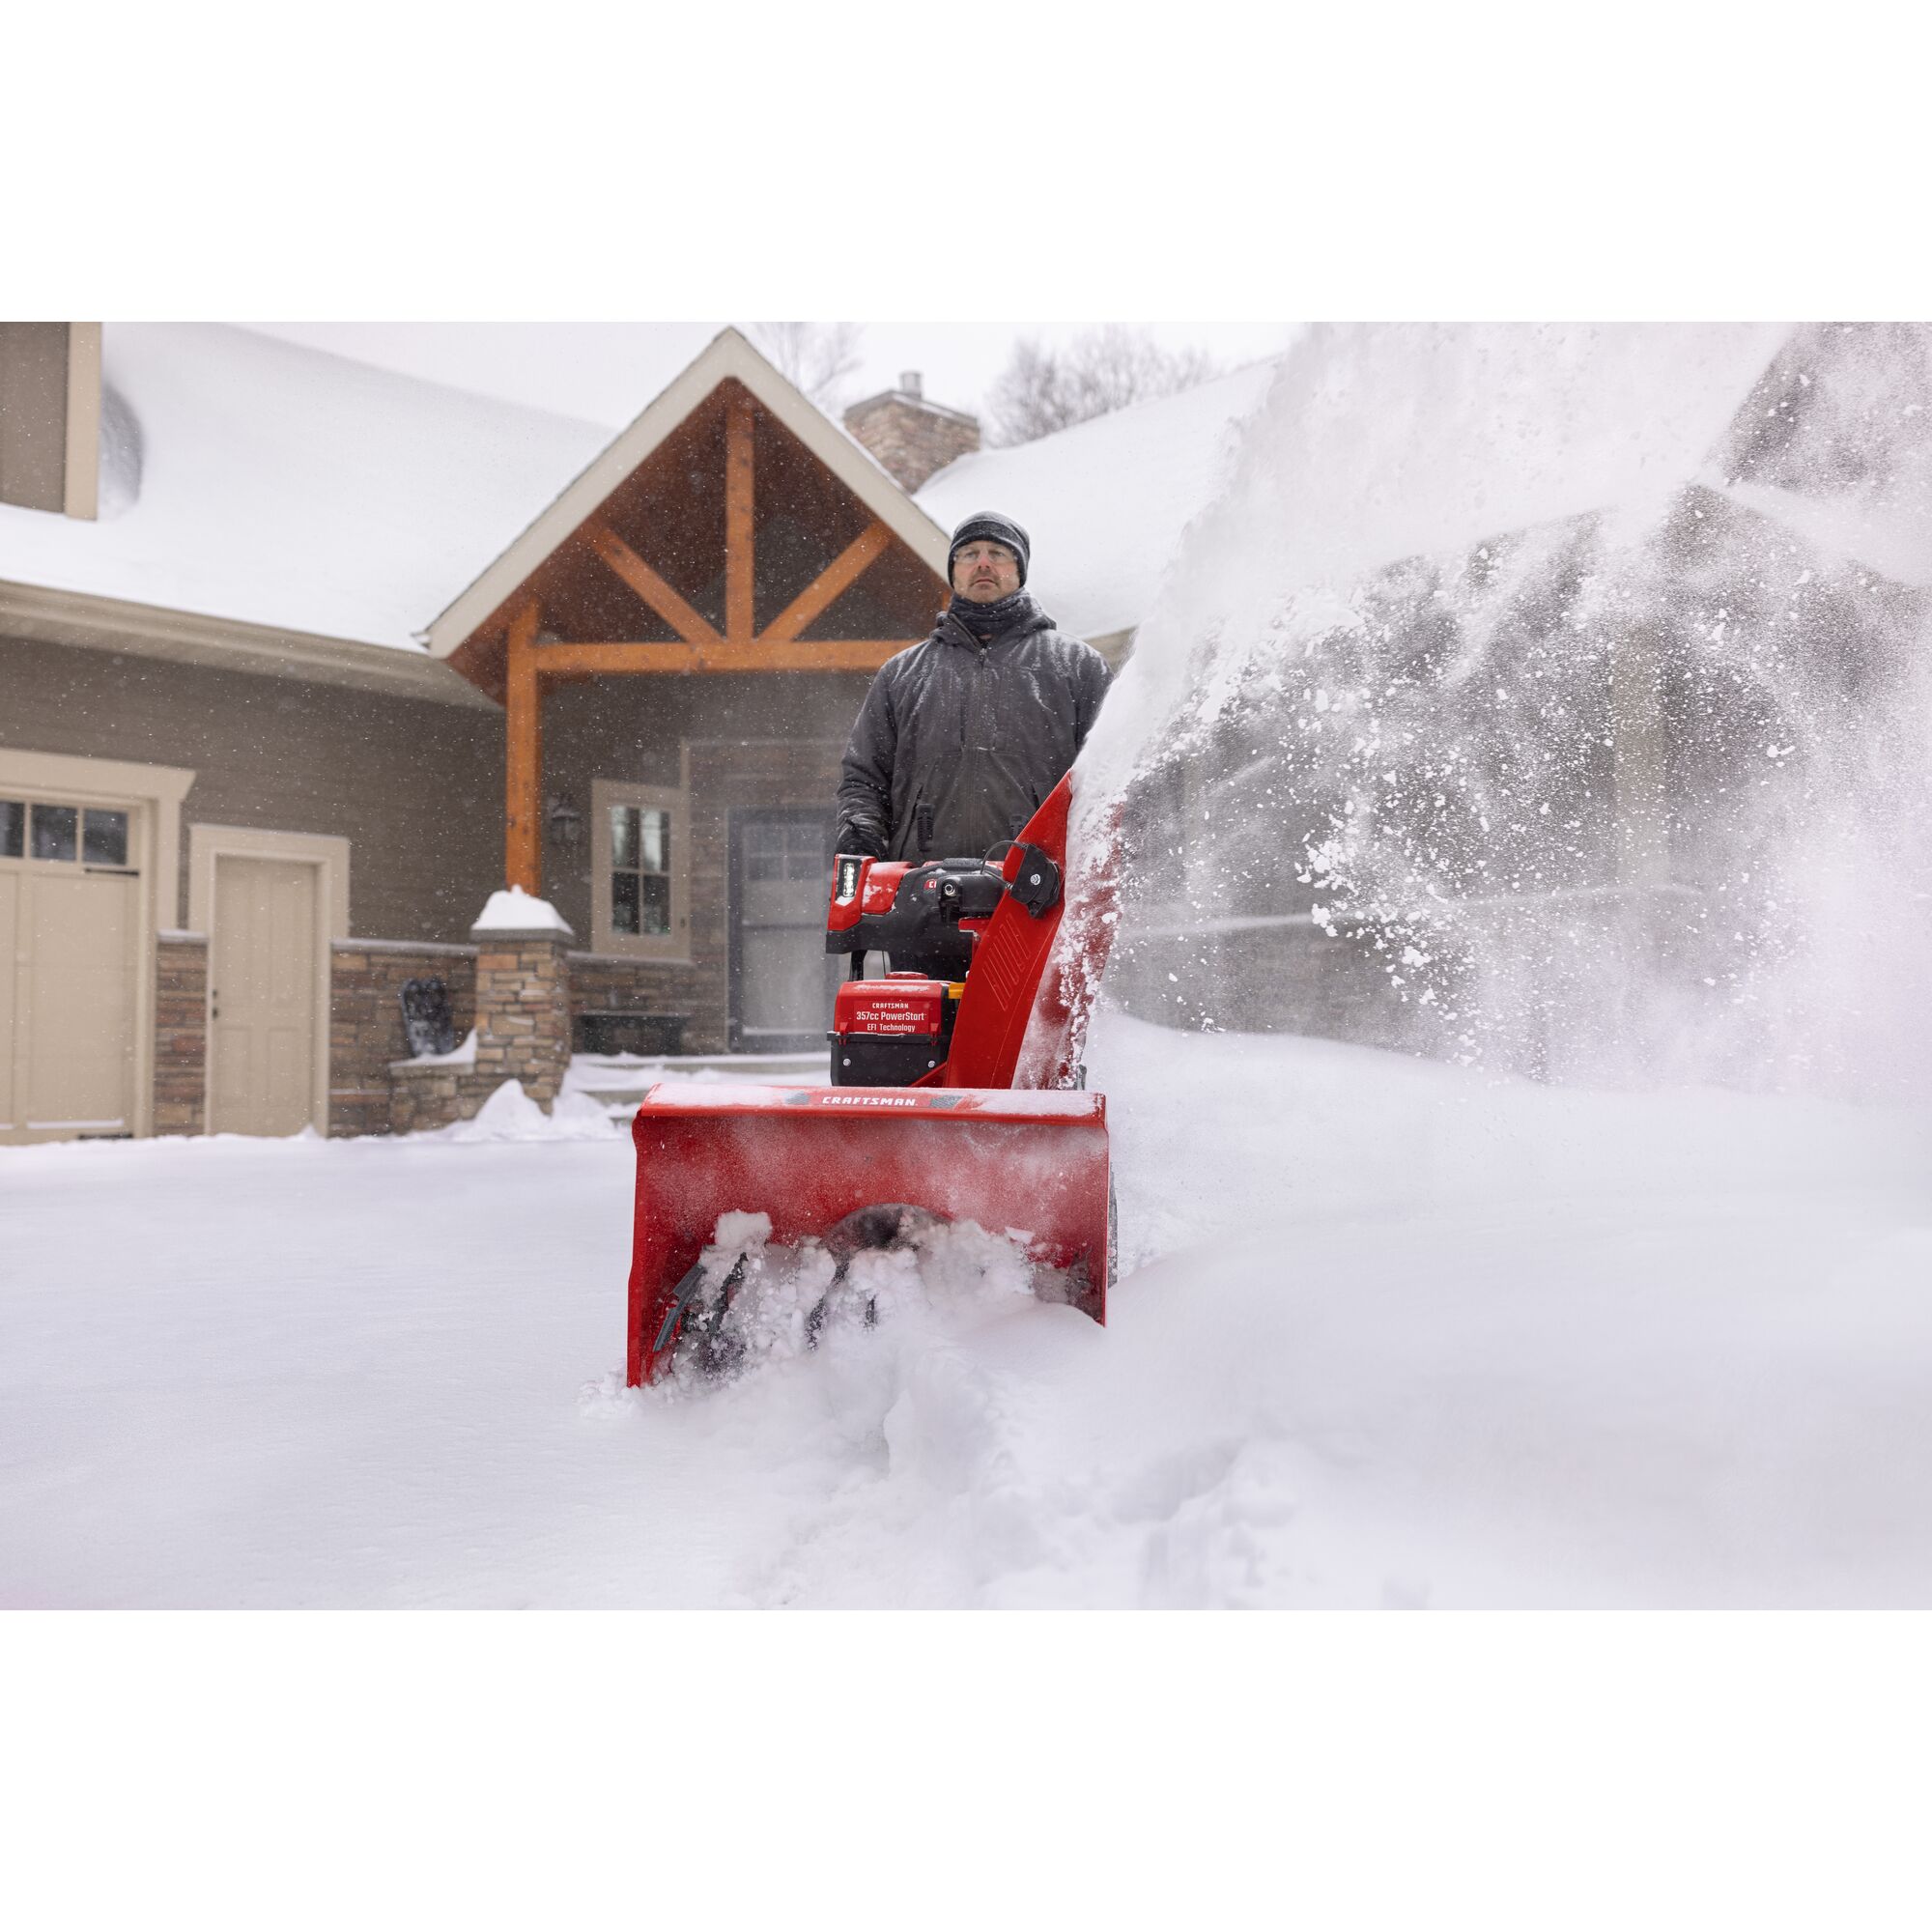 CRAFTSMAN Performance 26 Track Snowblower clearing snow off driveway green house in background